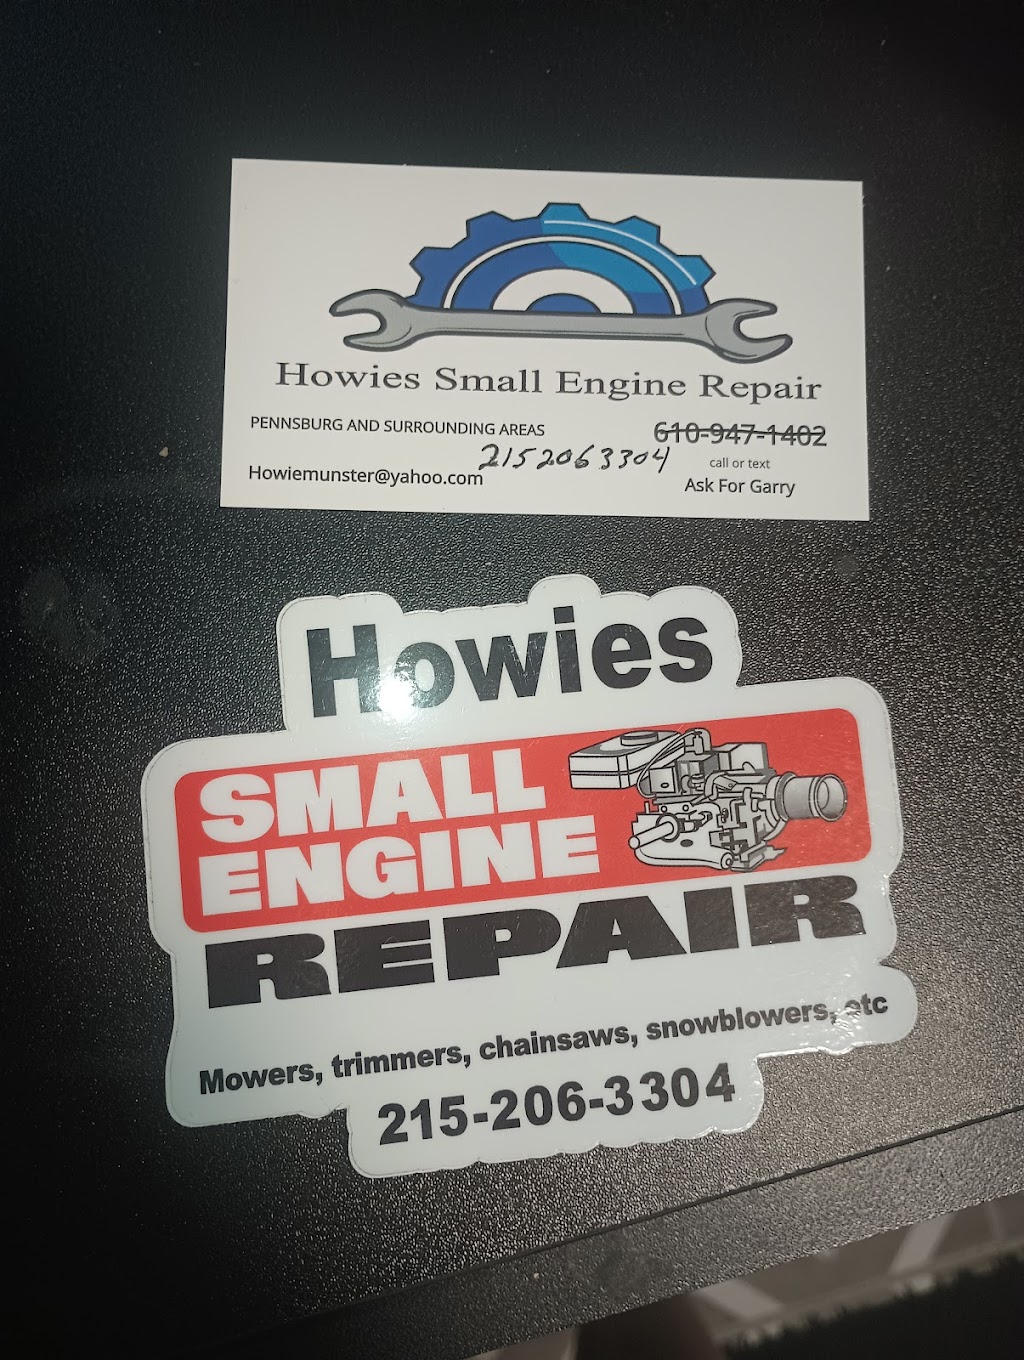 Howies Small Engine Repair | 230 W 7th St, Pennsburg, PA 18073 | Phone: (215) 206-3304